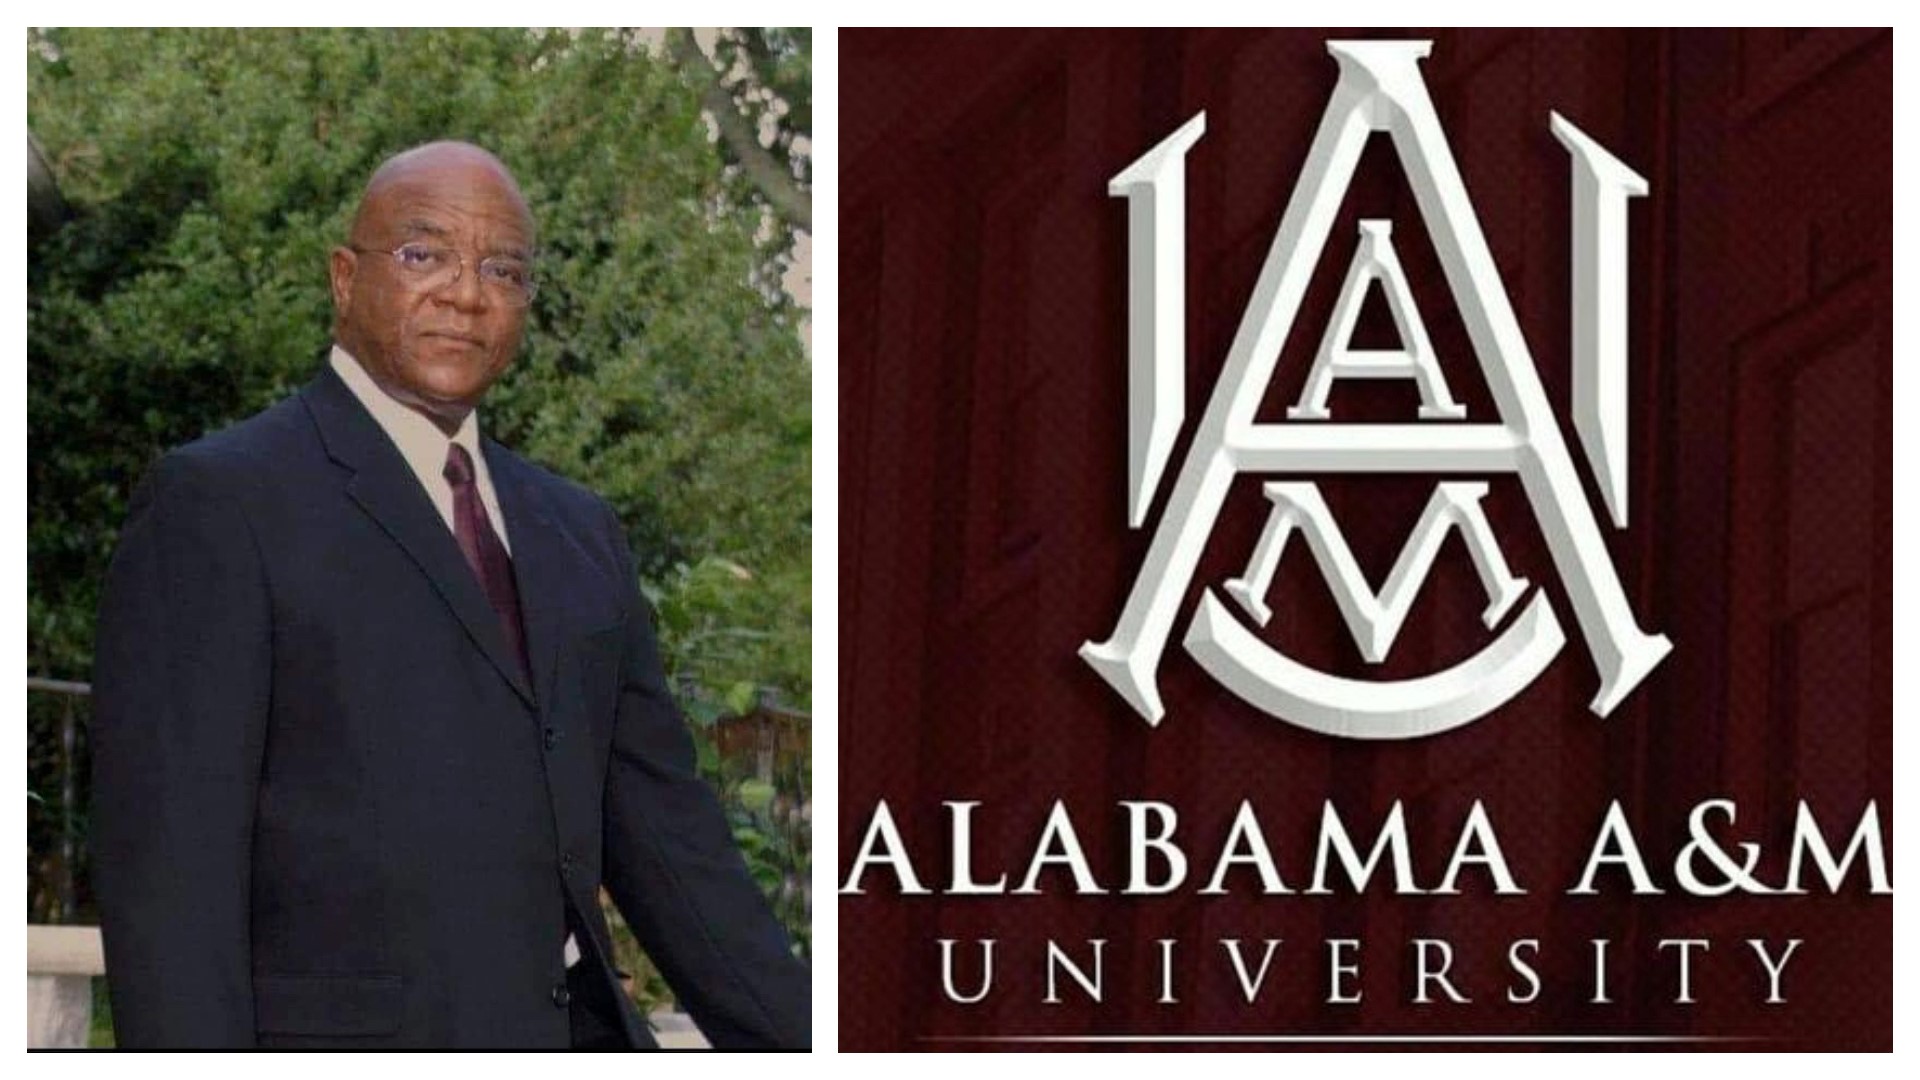 Former Alabama A&M Football Coach Ray Greene passed away Friday. During his tenure with the Bulldogs, Greene won 4 SIAC Championships. He was 84.